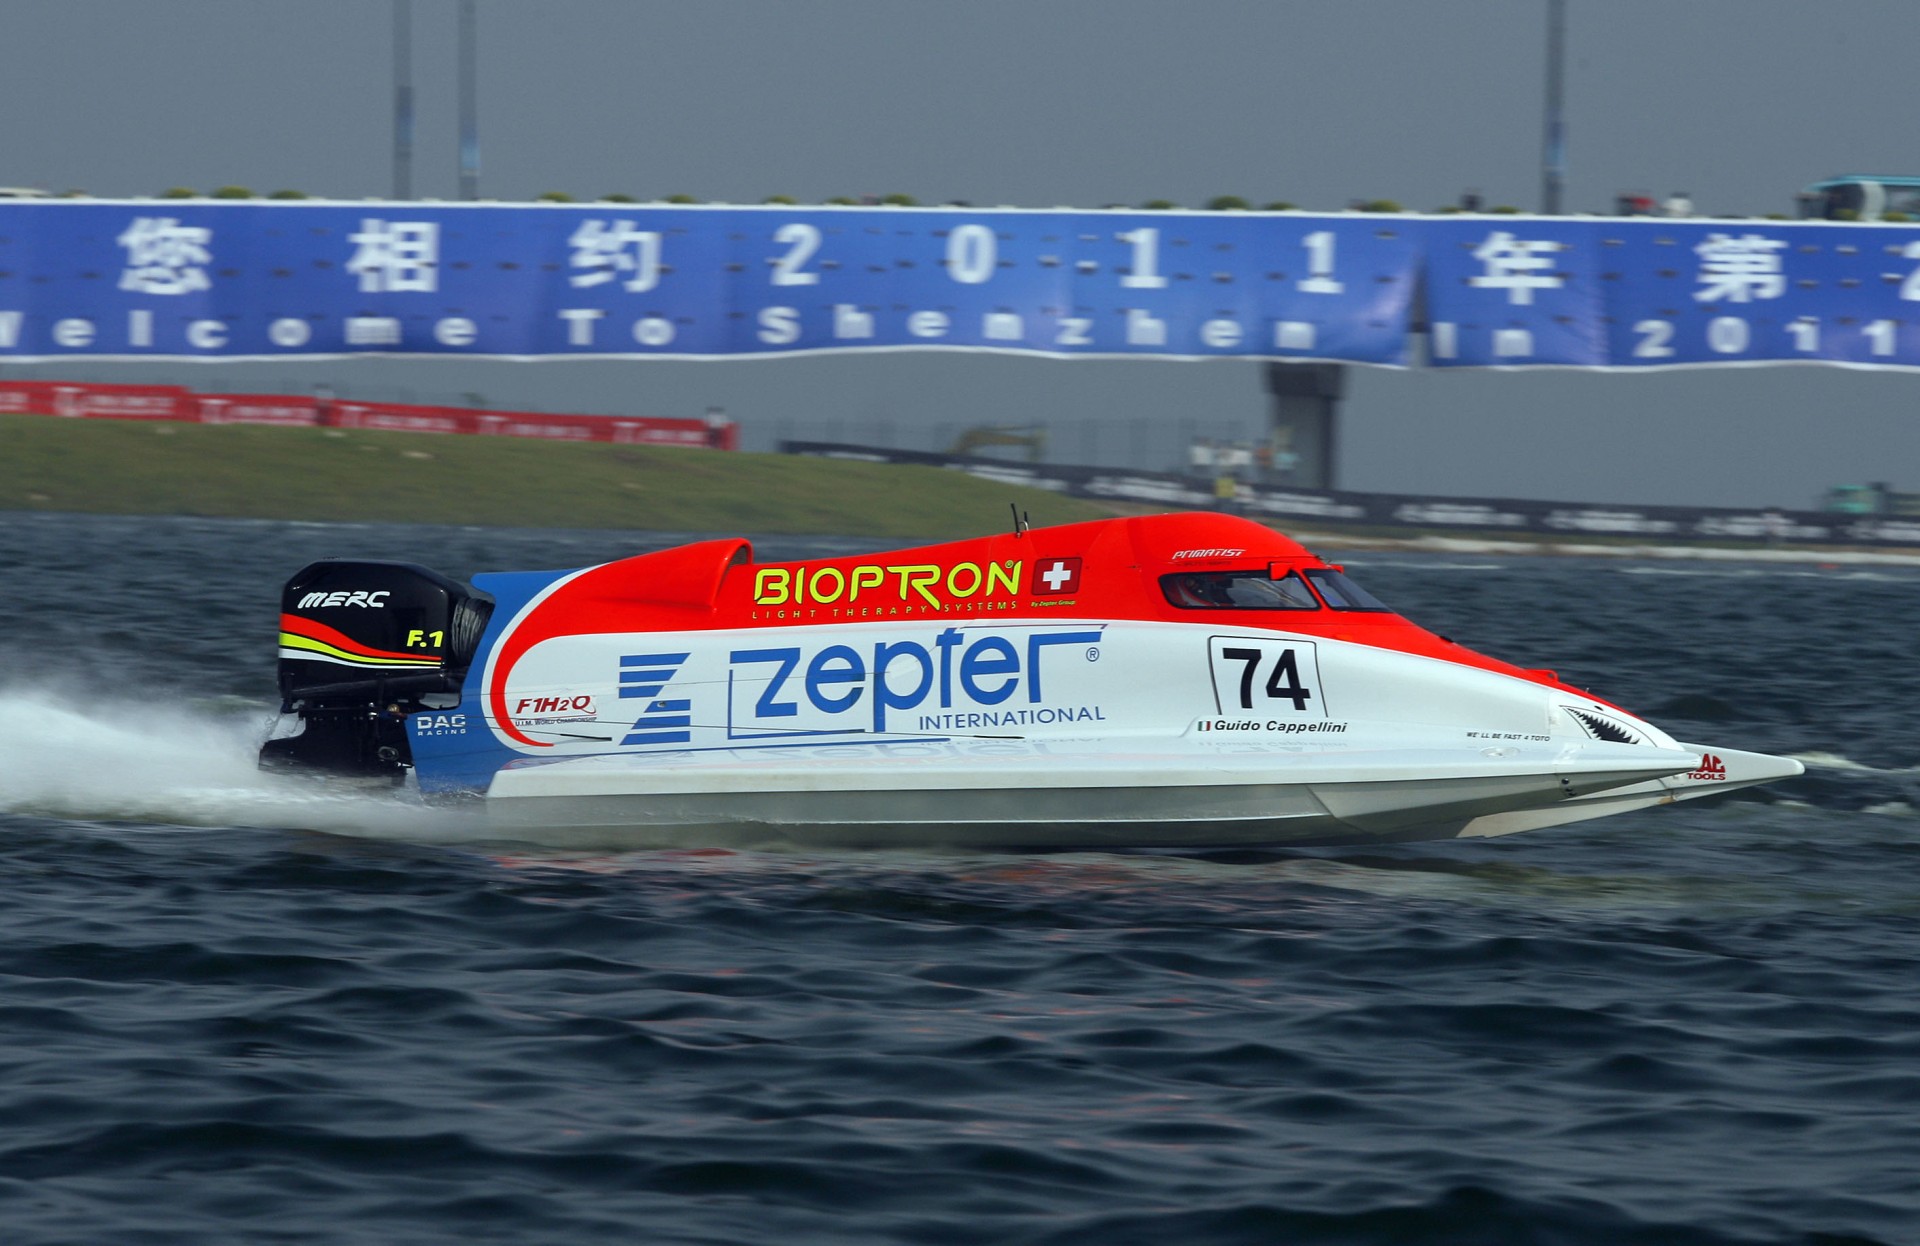 GP OF CHINA SHENZHEN-171009-Guido Cappellini of Italy of the Zepter Team in action during the race of the UIM F1 Powerboat Grand Prix of China, at the Shenzhen Bay Inner Lake, Shenzhen, China. The second race in China is the 5th leg of the season, October 17-18, 2009. Picture by Paul Lakatos/Idea Marketing.